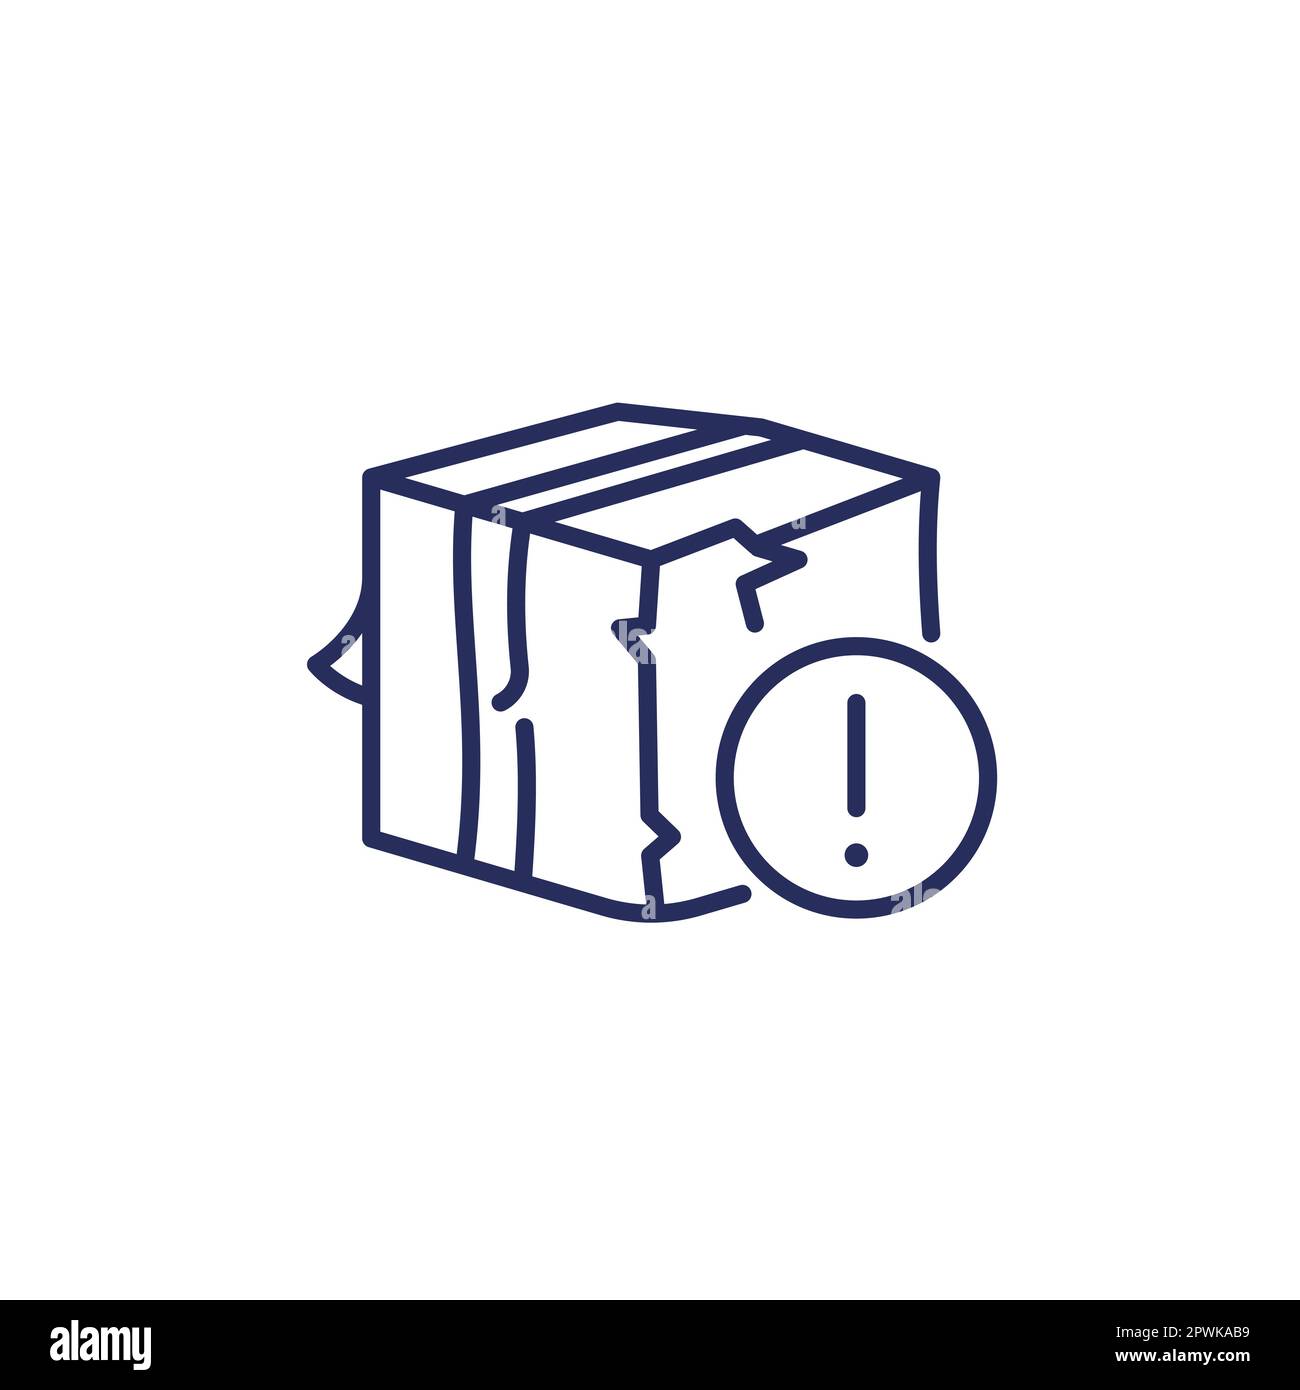 damaged package line icon with broken box Stock Vector